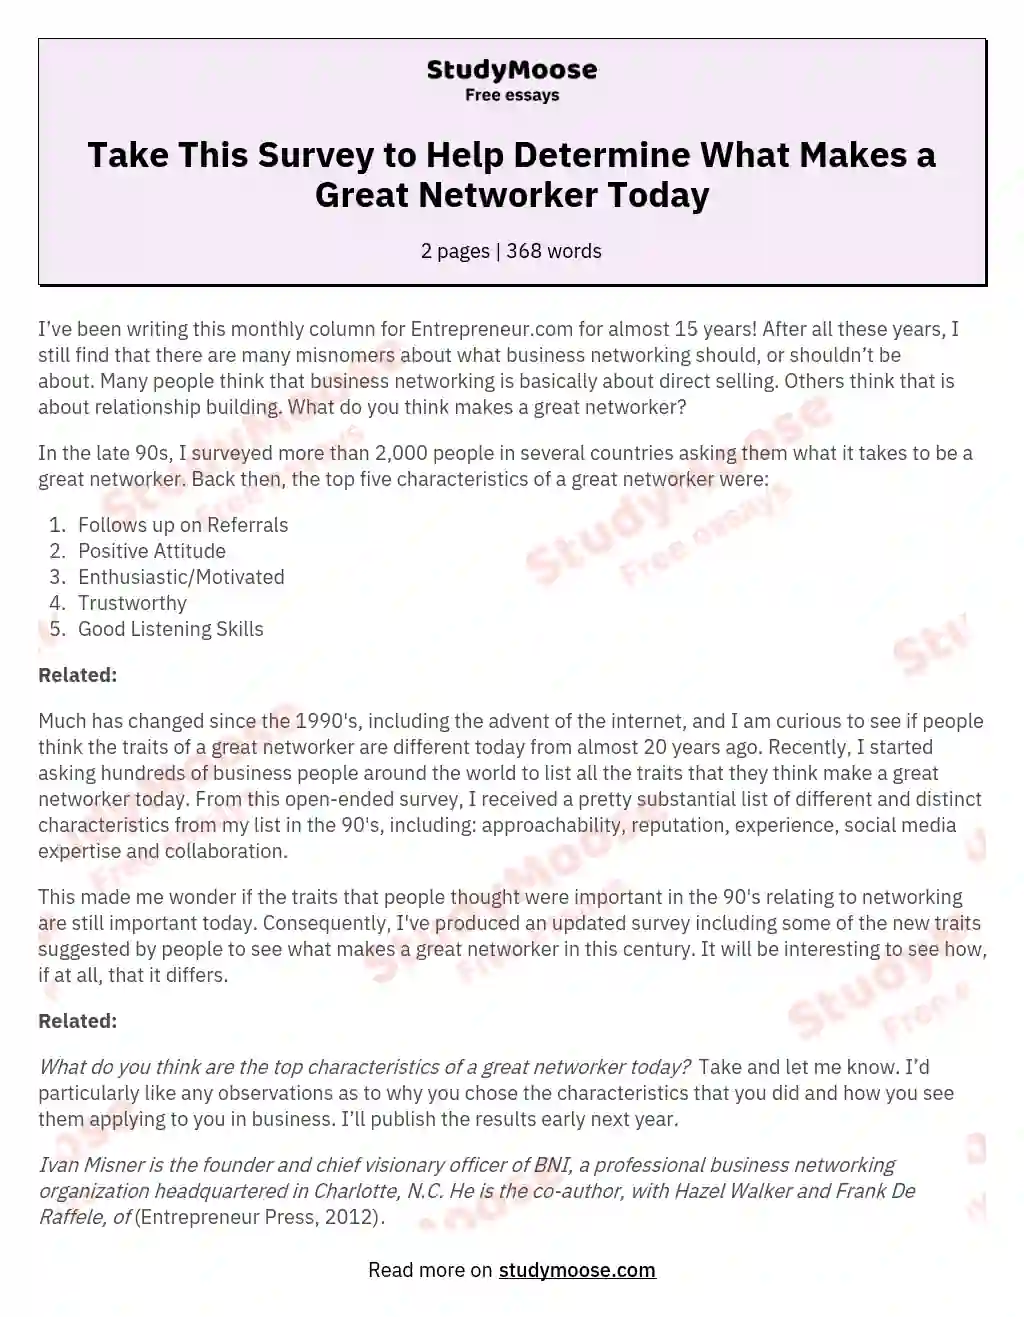 Take This Survey to Help Determine What Makes a Great Networker Today essay